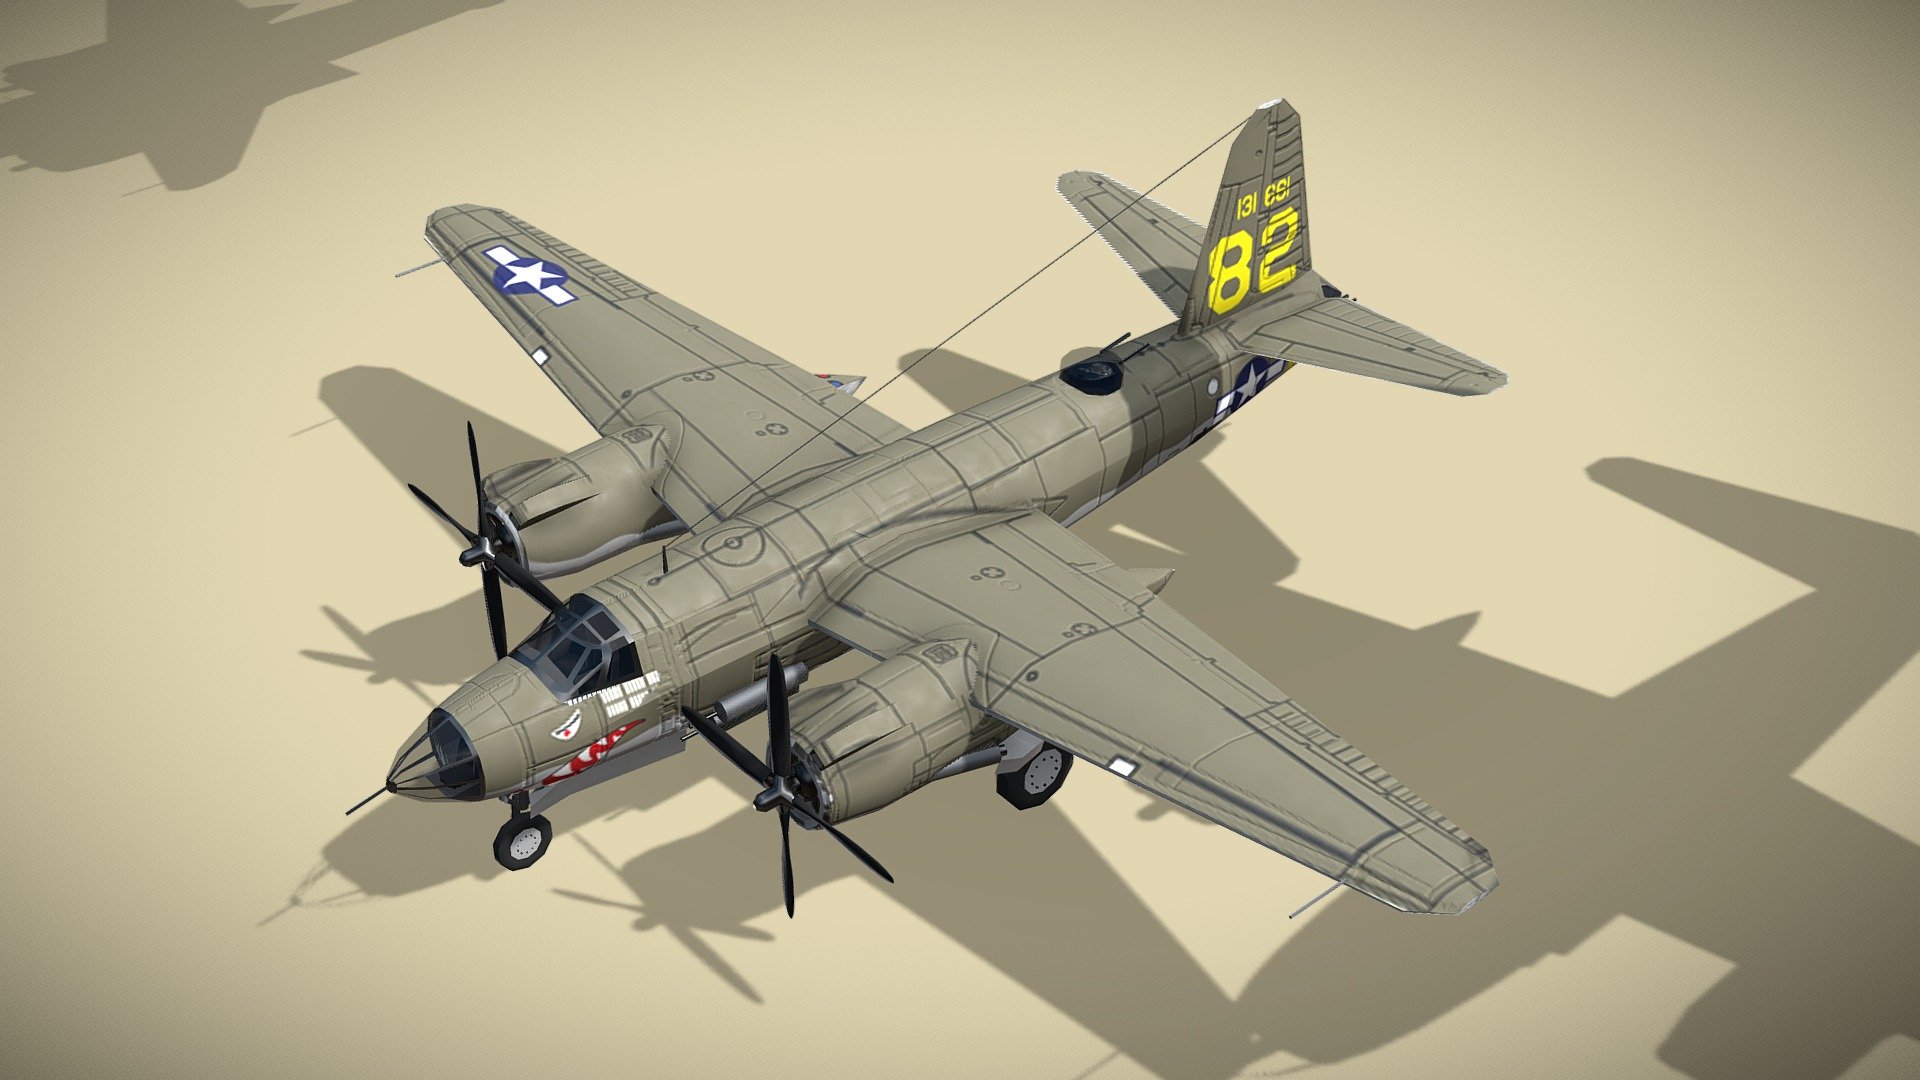 Martin B-26 Marauder

Lowpoly model of american WW2 bomber



Martin B-26 Marauder is an American twin-engined medium bomber that saw extensive service during World War II. First used in the Pacific Theater of World War II in early 1942, it was also used in the Mediterranean Theater and in Western Europe. After entering service with the United States Army aviation units, the aircraft quickly received the reputation of a &ldquo;widowmaker